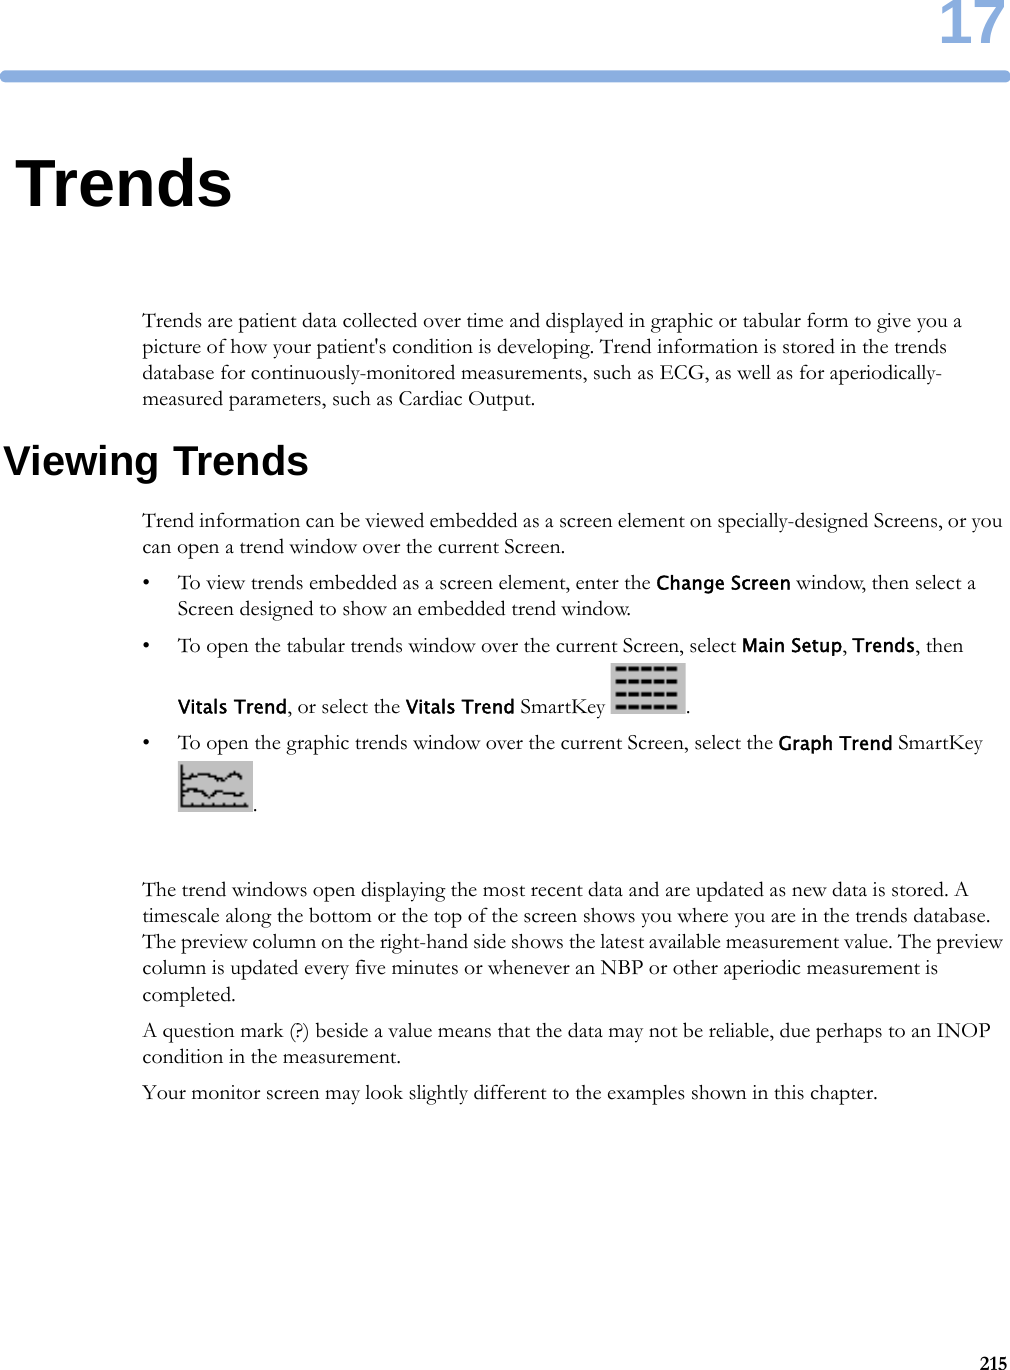 1721517TrendsTrends are patient data collected over time and displayed in graphic or tabular form to give you a picture of how your patient&apos;s condition is developing. Trend information is stored in the trends database for continuously-monitored measurements, such as ECG, as well as for aperiodically-measured parameters, such as Cardiac Output.Viewing TrendsTrend information can be viewed embedded as a screen element on specially-designed Screens, or you can open a trend window over the current Screen.• To view trends embedded as a screen element, enter the Change Screen window, then select a Screen designed to show an embedded trend window.• To open the tabular trends window over the current Screen, select Main Setup, Trends, then Vitals Trend, or select the Vitals Trend SmartKey  .• To open the graphic trends window over the current Screen, select the Graph Trend SmartKey .The trend windows open displaying the most recent data and are updated as new data is stored. A timescale along the bottom or the top of the screen shows you where you are in the trends database. The preview column on the right-hand side shows the latest available measurement value. The preview column is updated every five minutes or whenever an NBP or other aperiodic measurement is completed.A question mark (?) beside a value means that the data may not be reliable, due perhaps to an INOP condition in the measurement.Your monitor screen may look slightly different to the examples shown in this chapter.